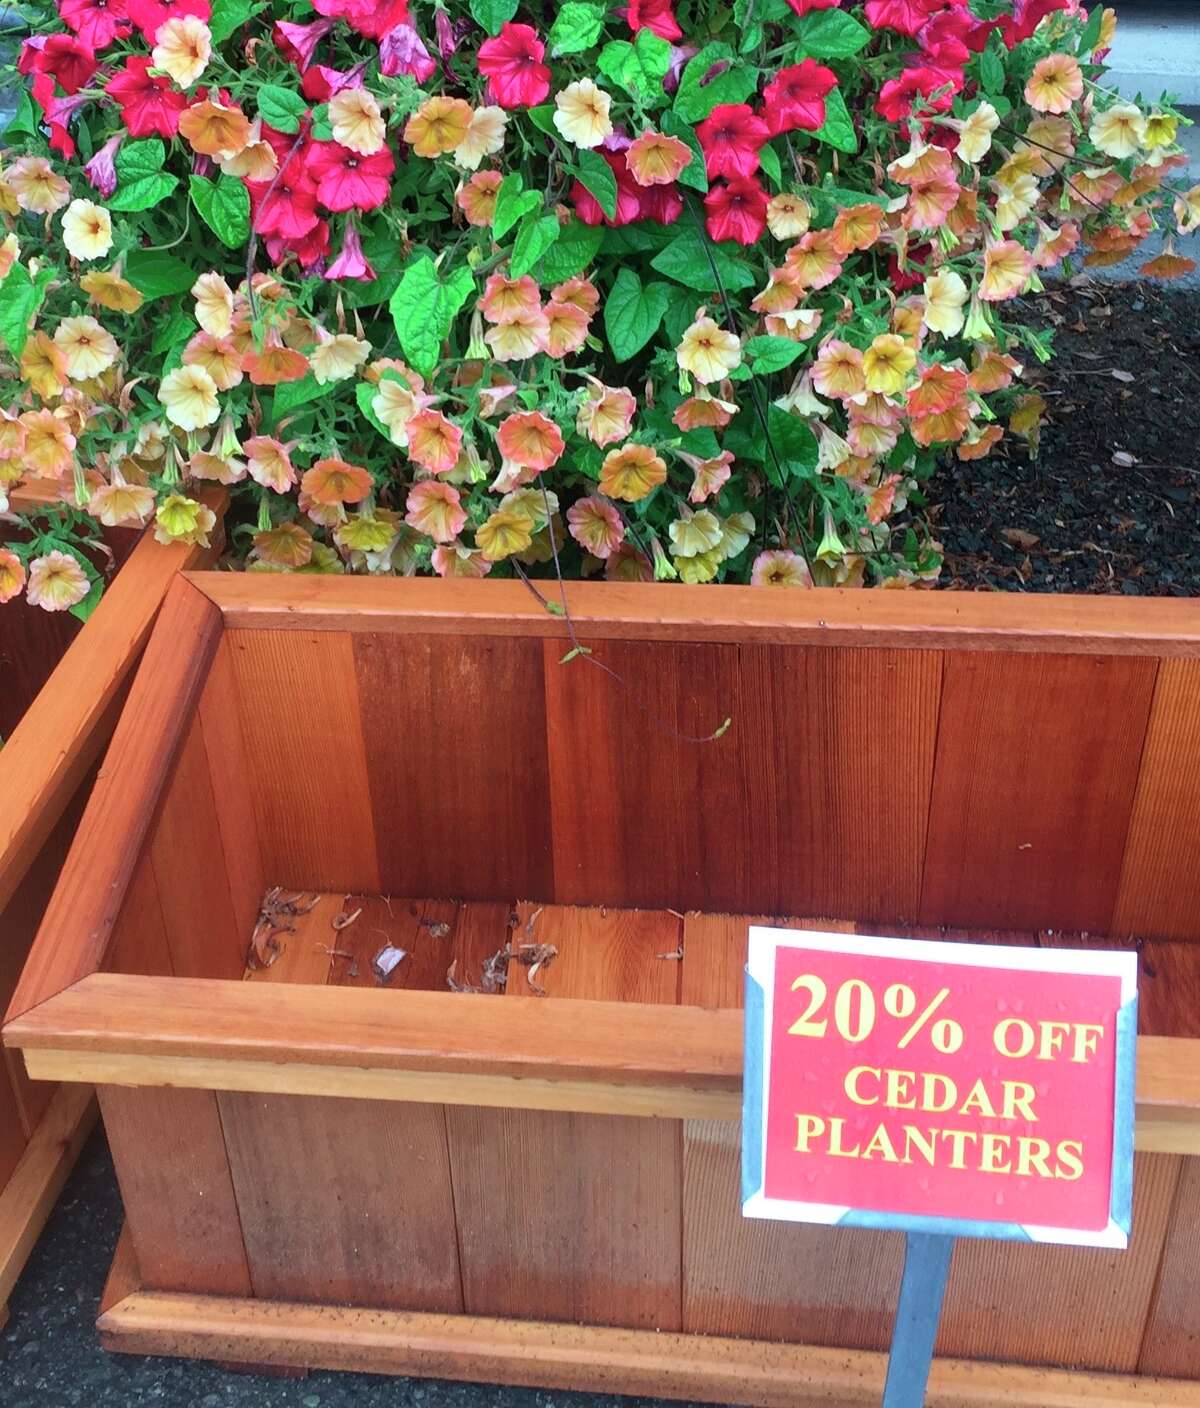 These cedar planters, photographed Aug. 21, 2019, at Bayview Farm & Garden near Langley, Wash., were included among the many items marked down during its annual late season progressive sale. Fall is the best time of the year to get new trees, shrubs and perennials into the ground before cold weather sets in. It's often the best time to buy them, too. (Dean Fosdick via AP)